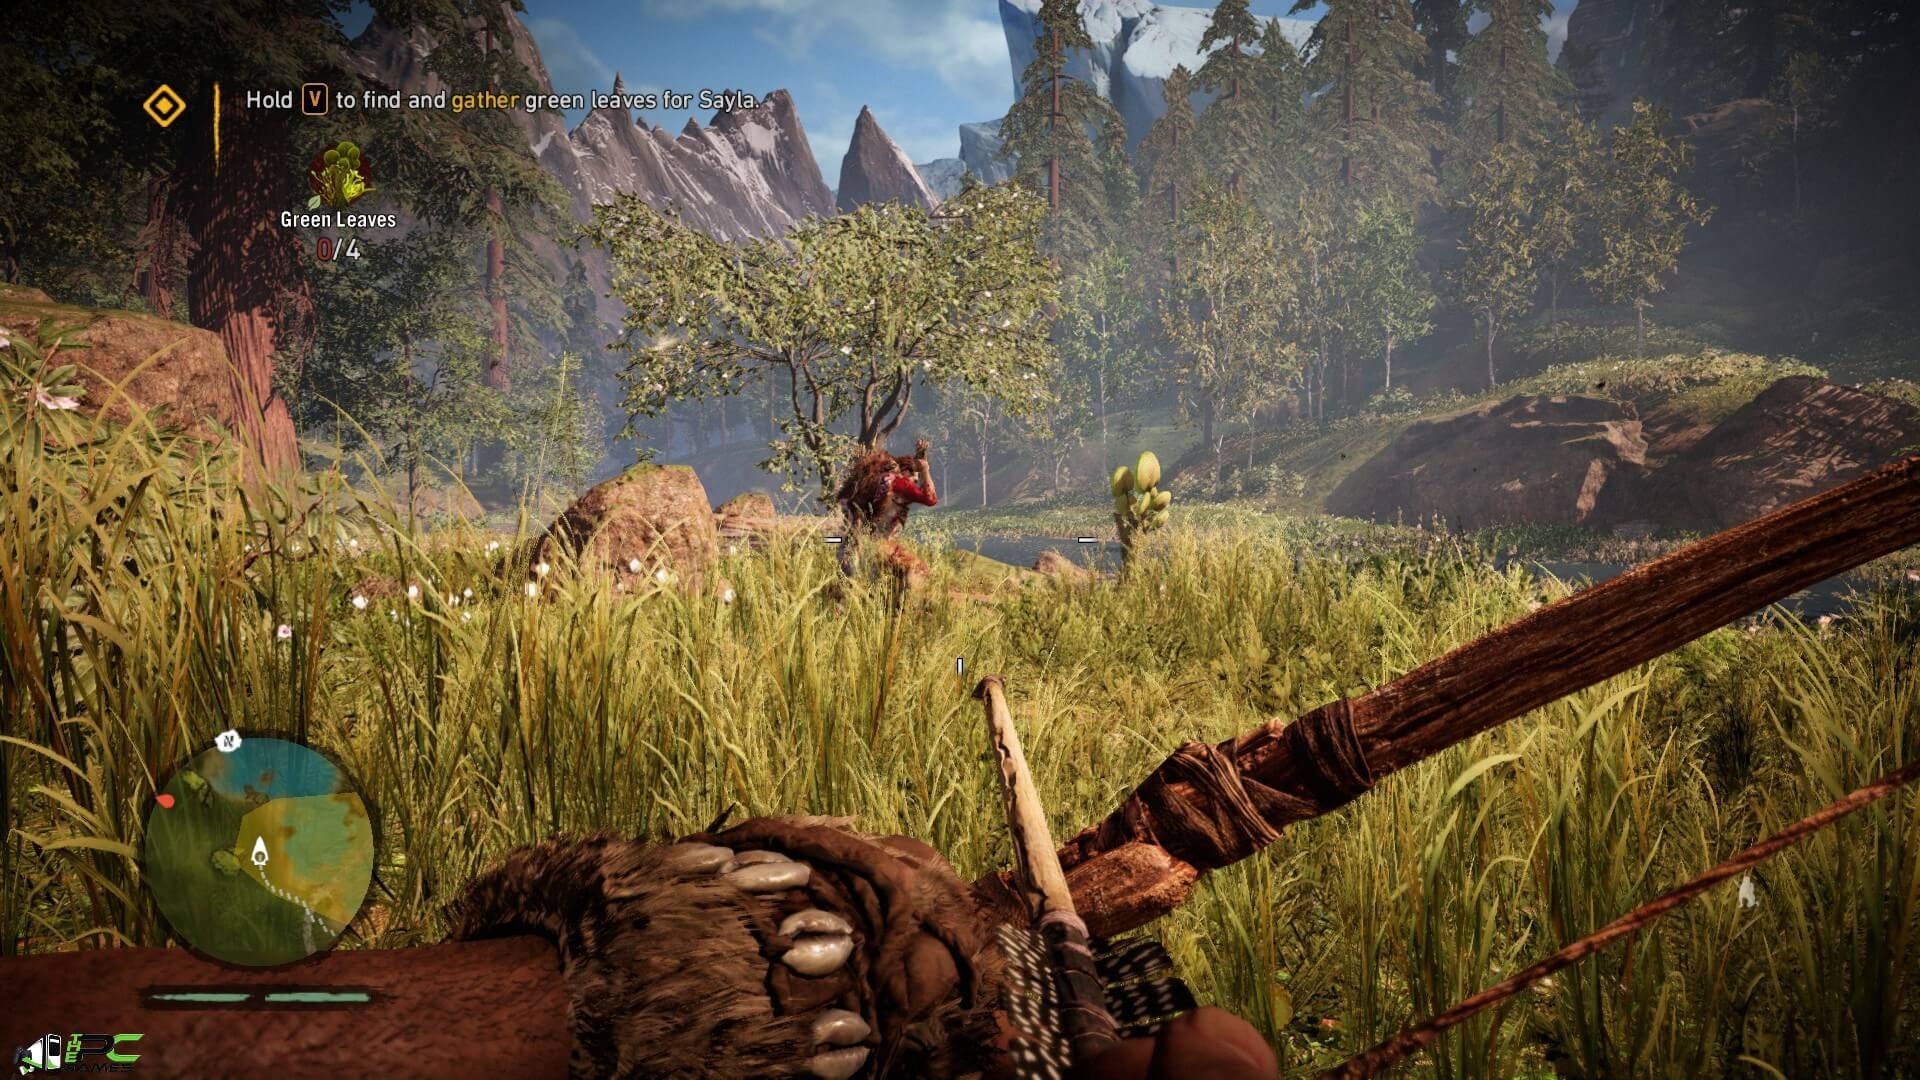 far cry primal 3dm download game launcher